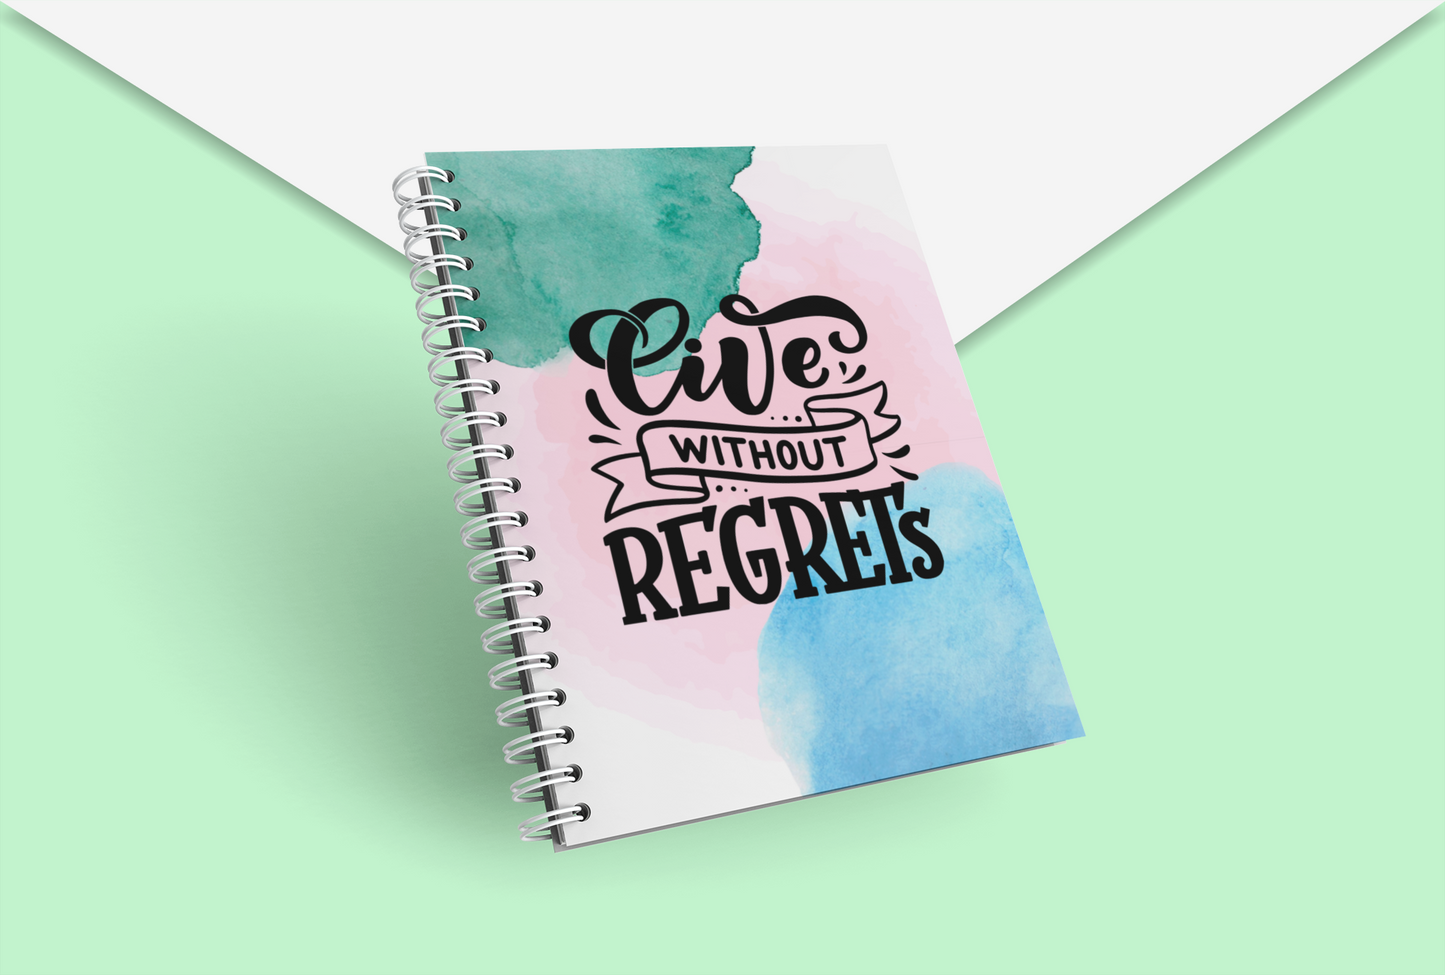 Live without regrets Notebook